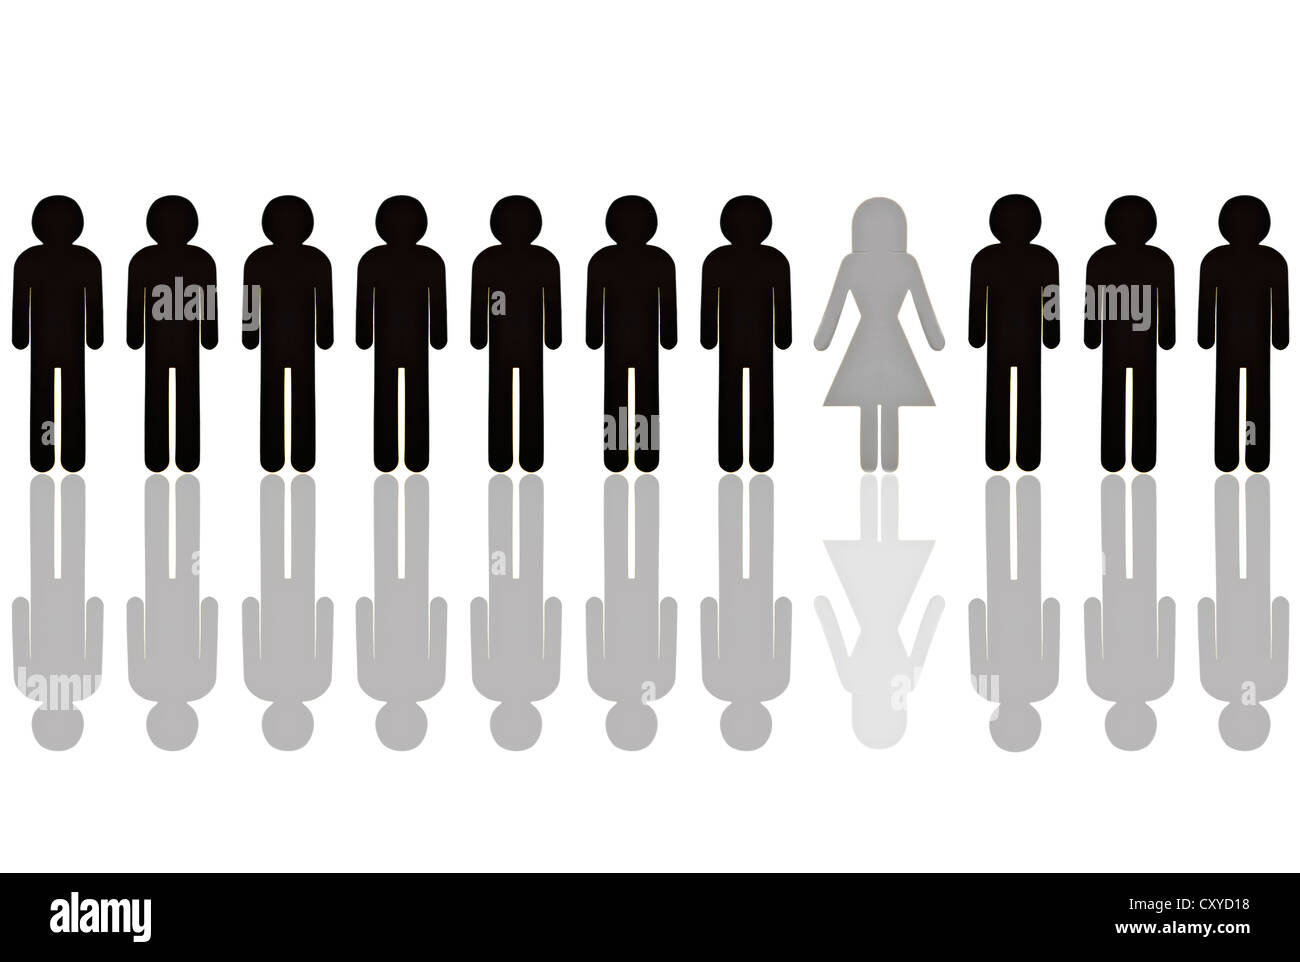 Row of black male pictogram figures with a single grey female figure, symbolic image for a women's quota Stock Photo